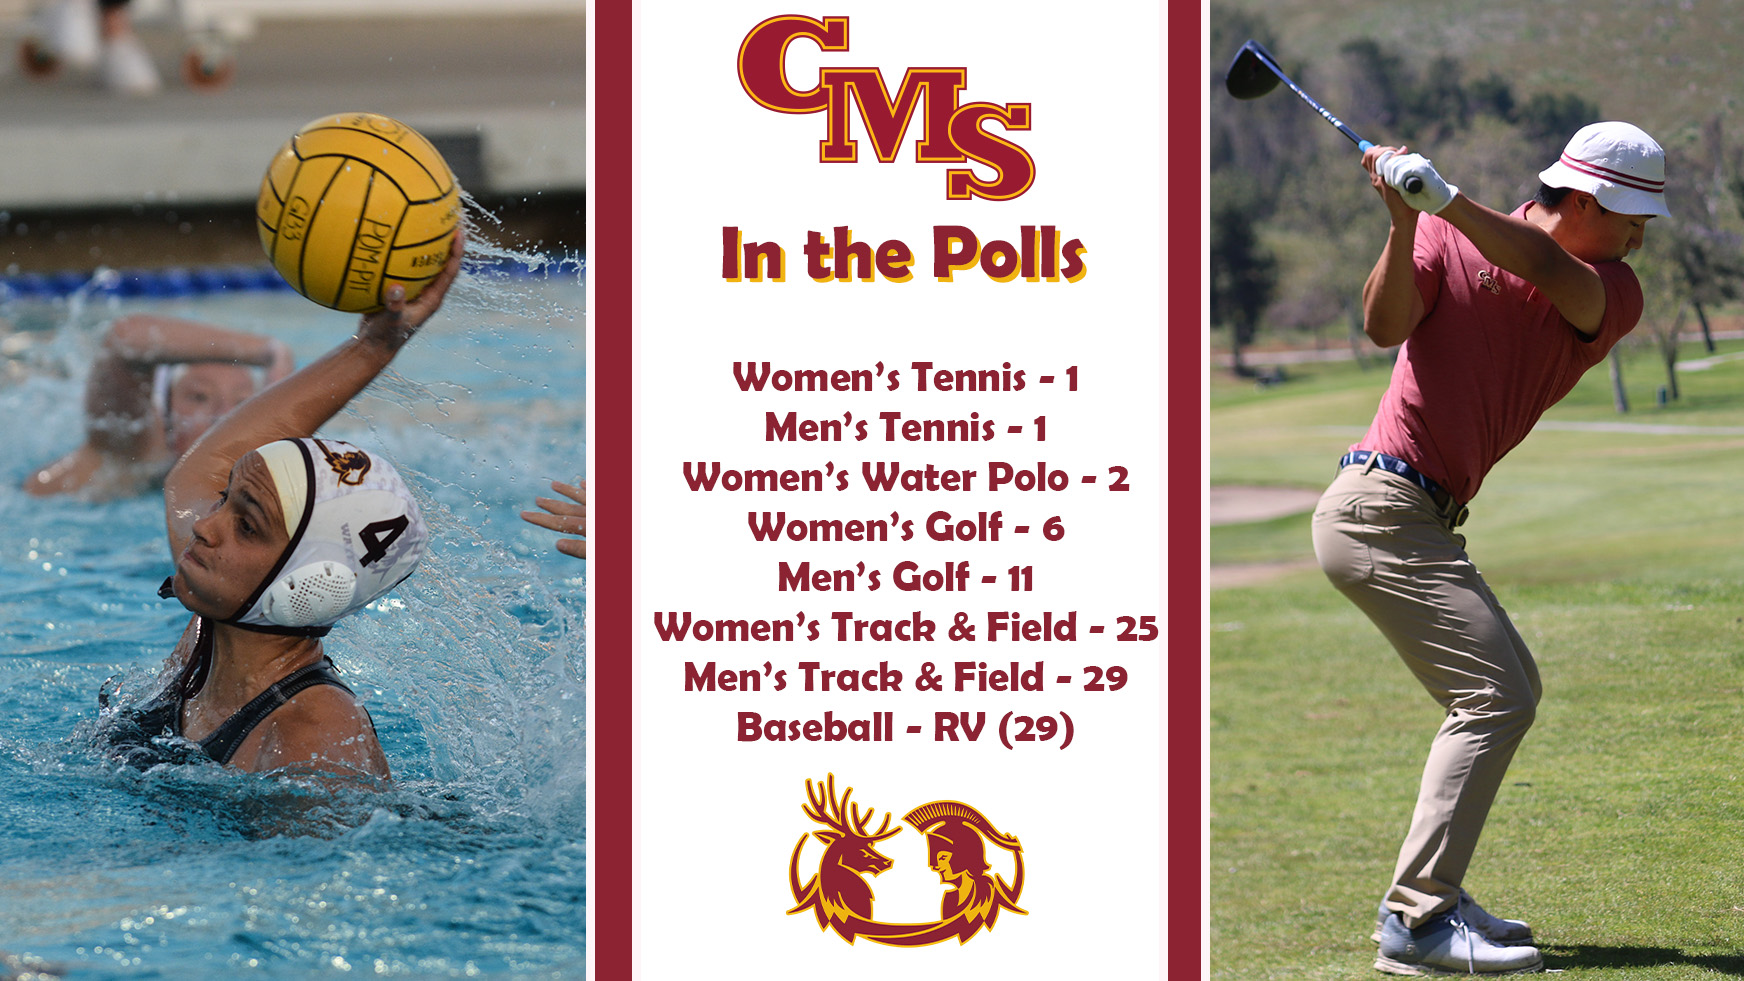 Action shots of women's water polo and men's golf with a list of the teams in the polls